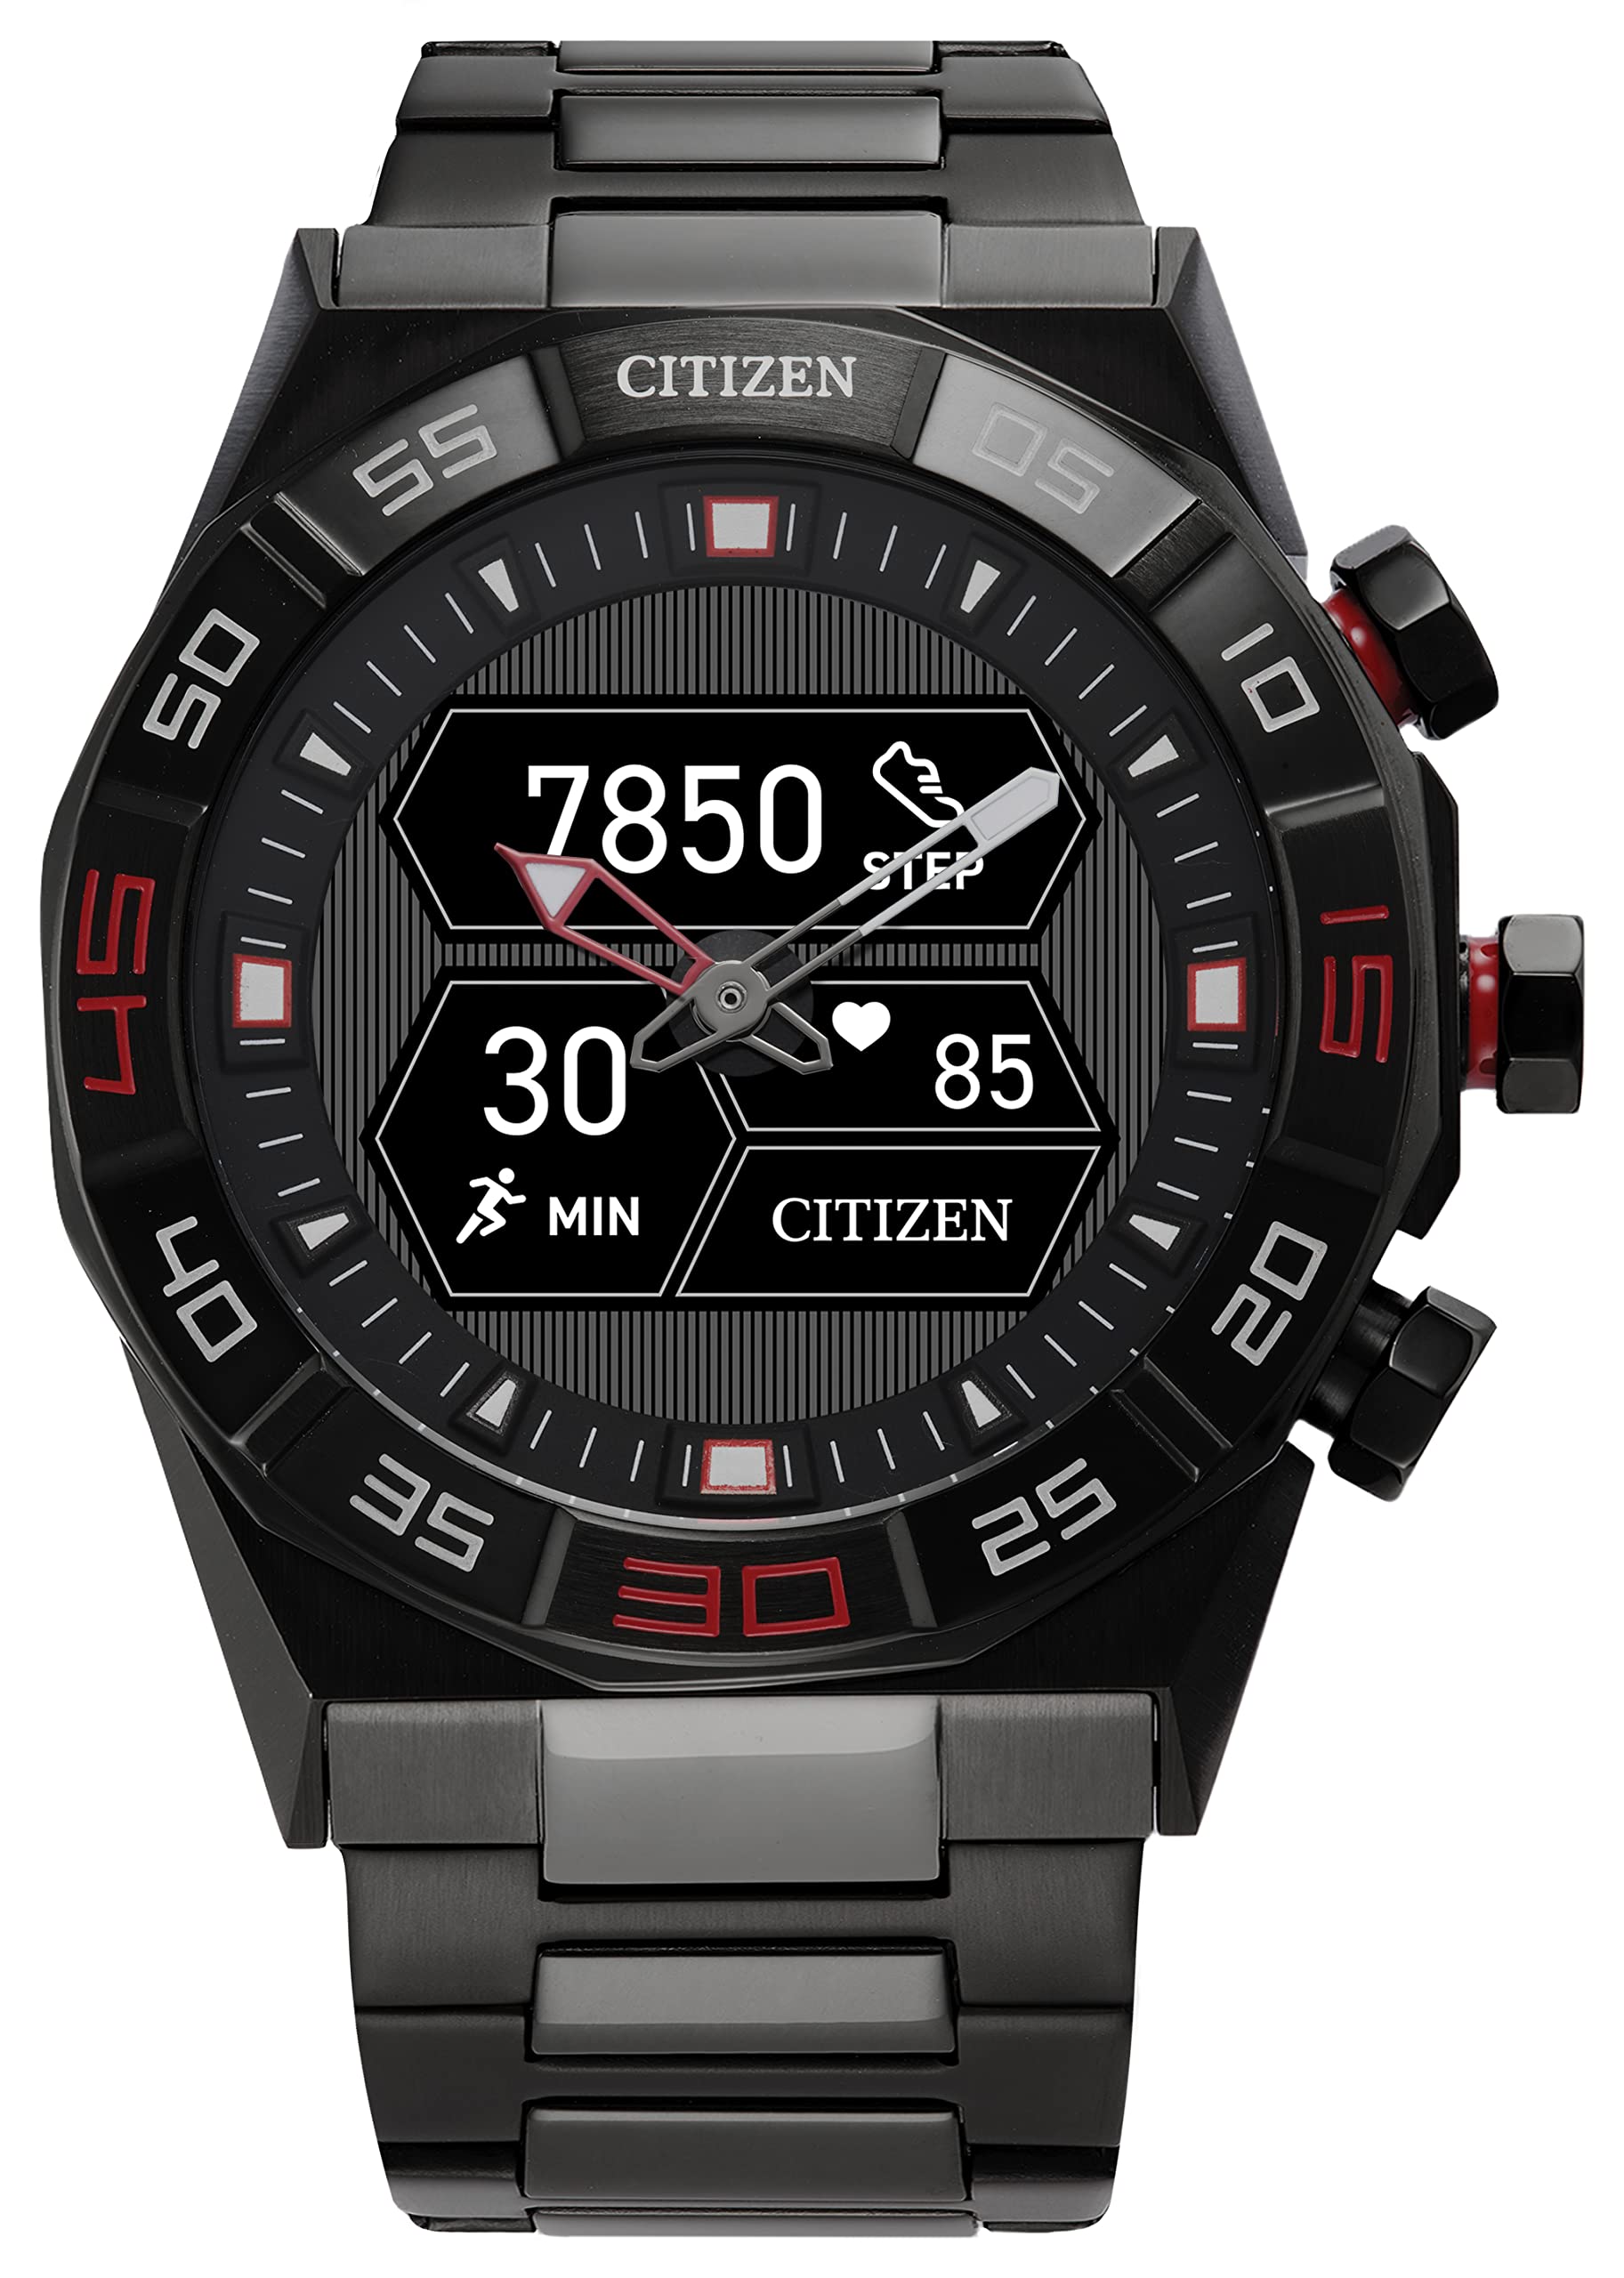 Citizen CZ Smart PQ2 Hybrid Smartwatch with YouQ Wellness app Featuring IBM Watson® AI and NASA Research, Black and White Customizable Display, Bluetooth, HR, Activity Tracker $118